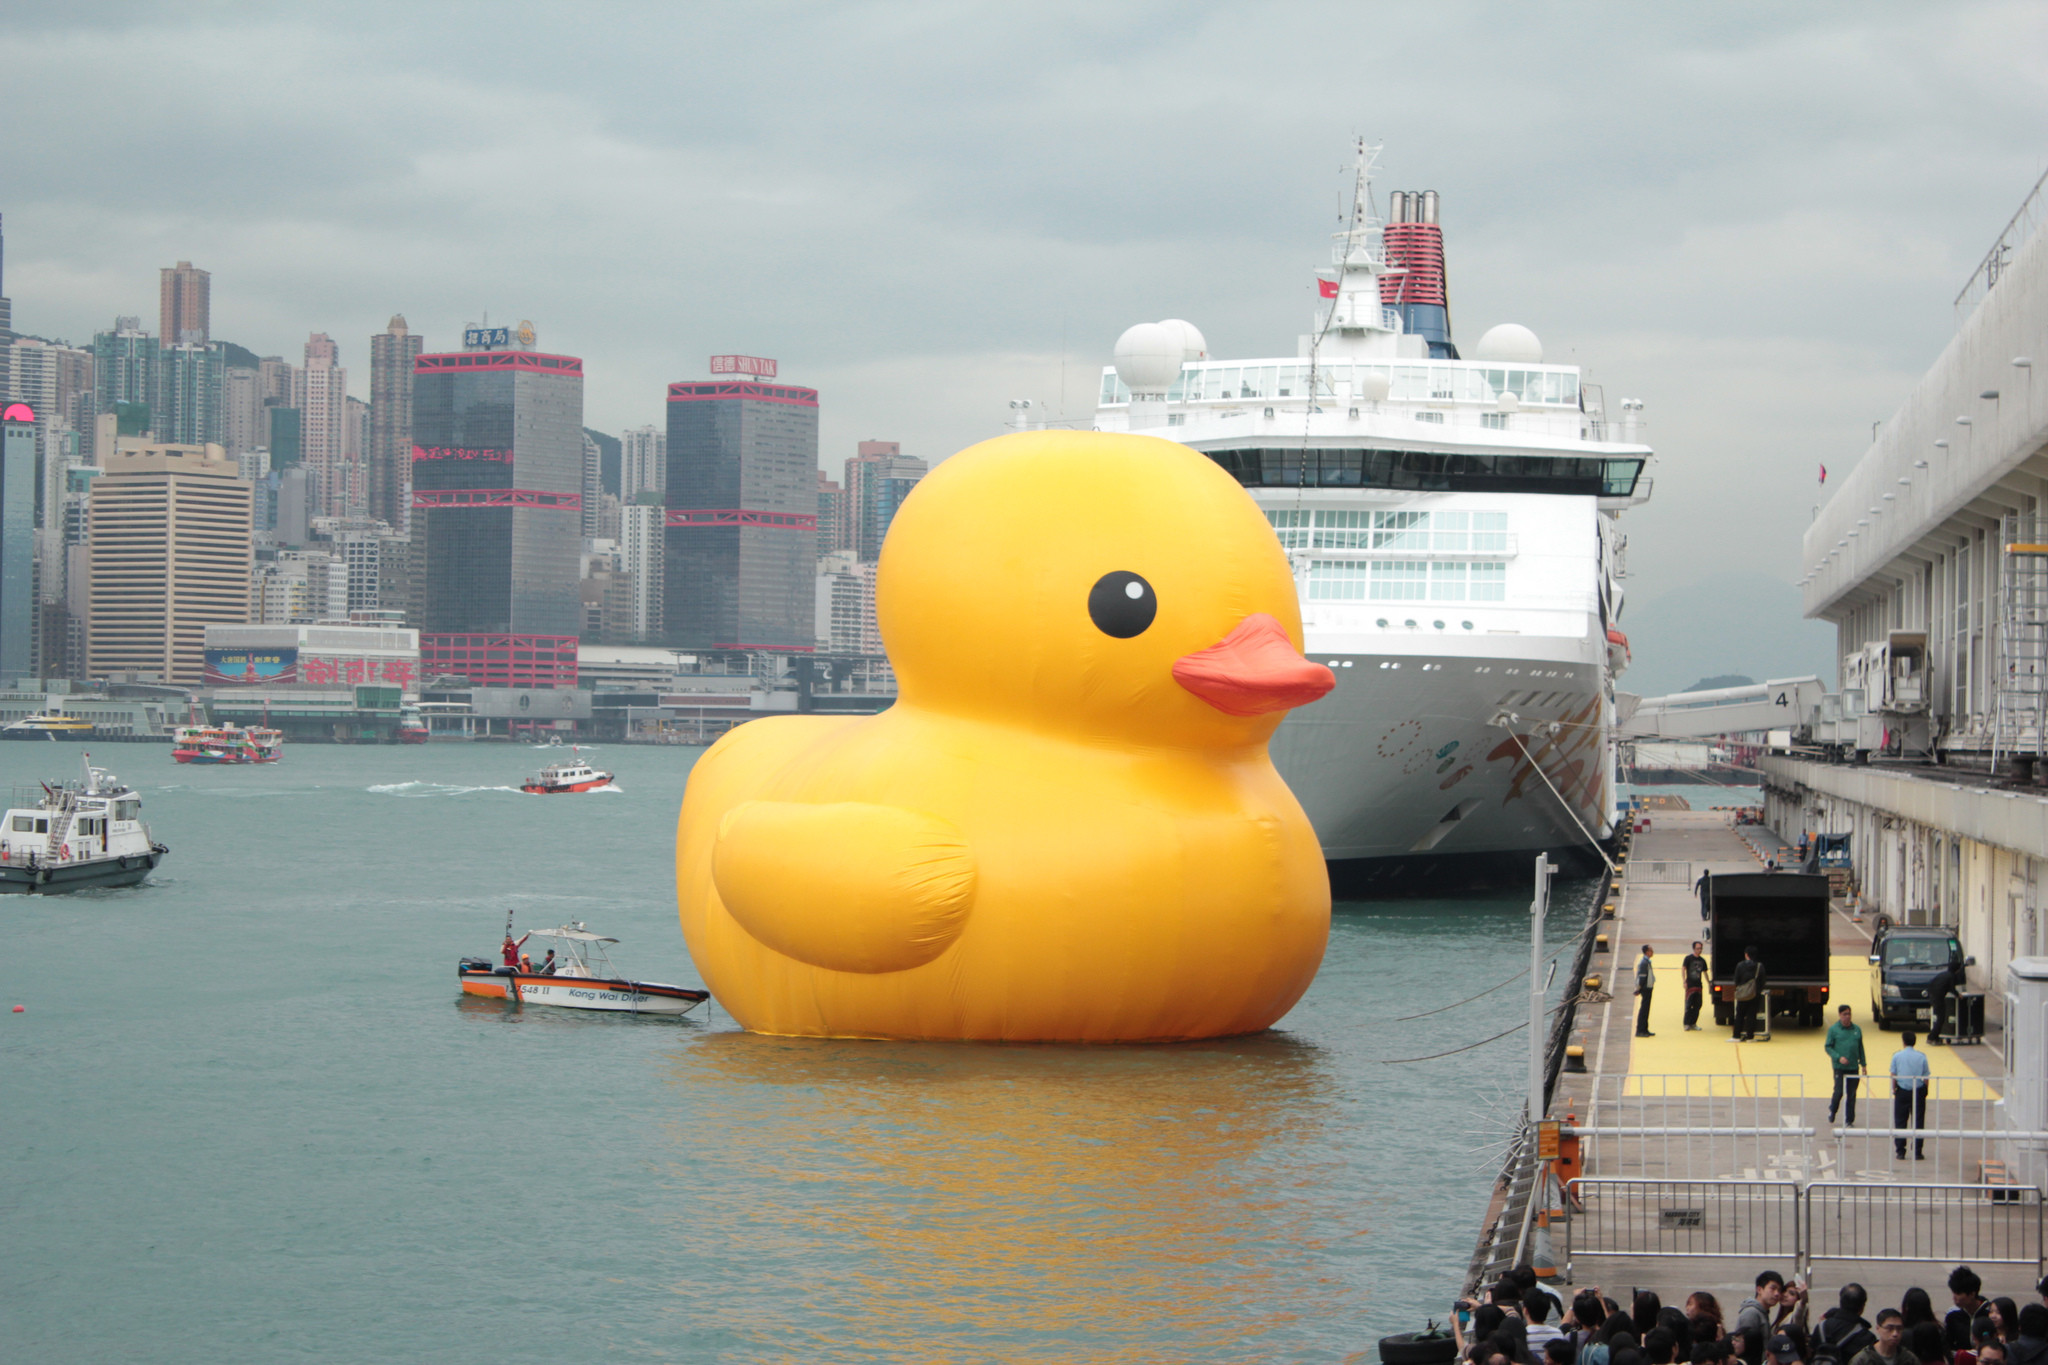 2048x1365 Giant Rubber Duck